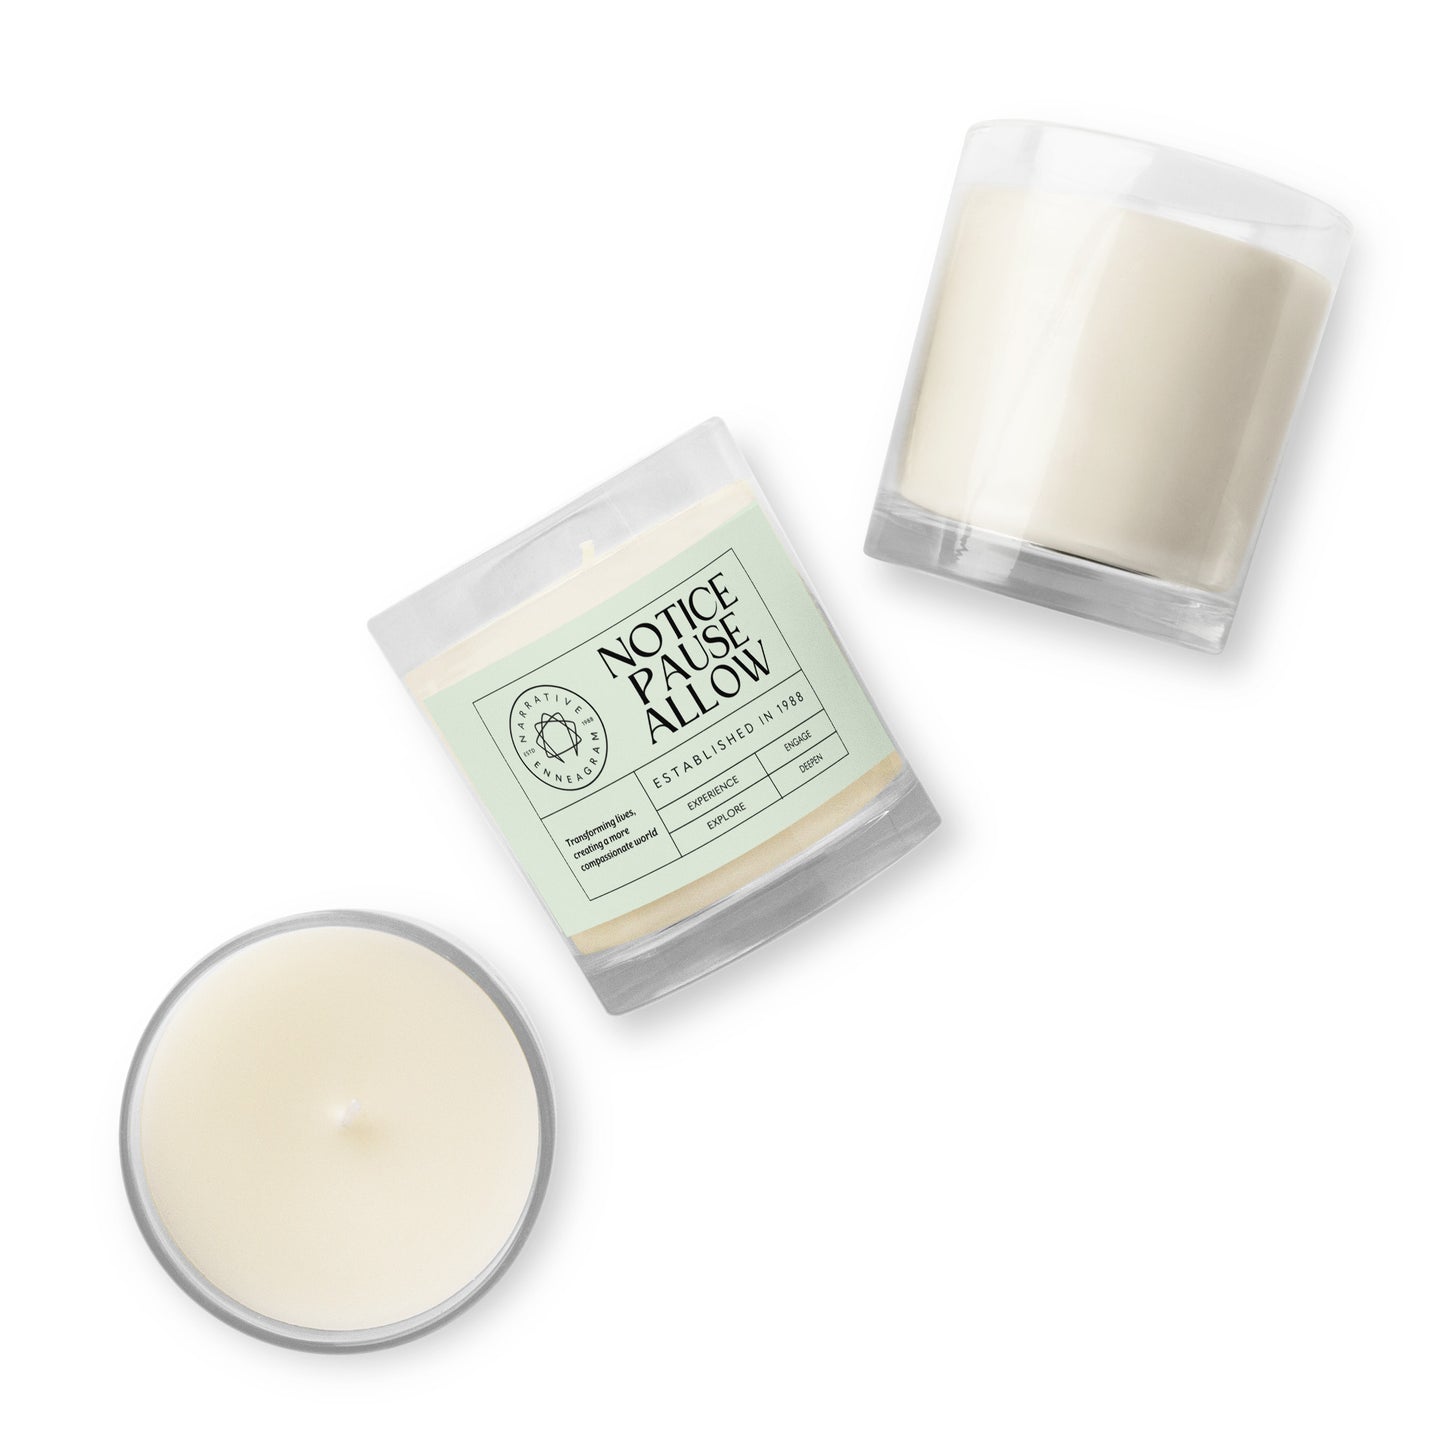 Notice, Pause, Allow (Glass jar soy wax candle)